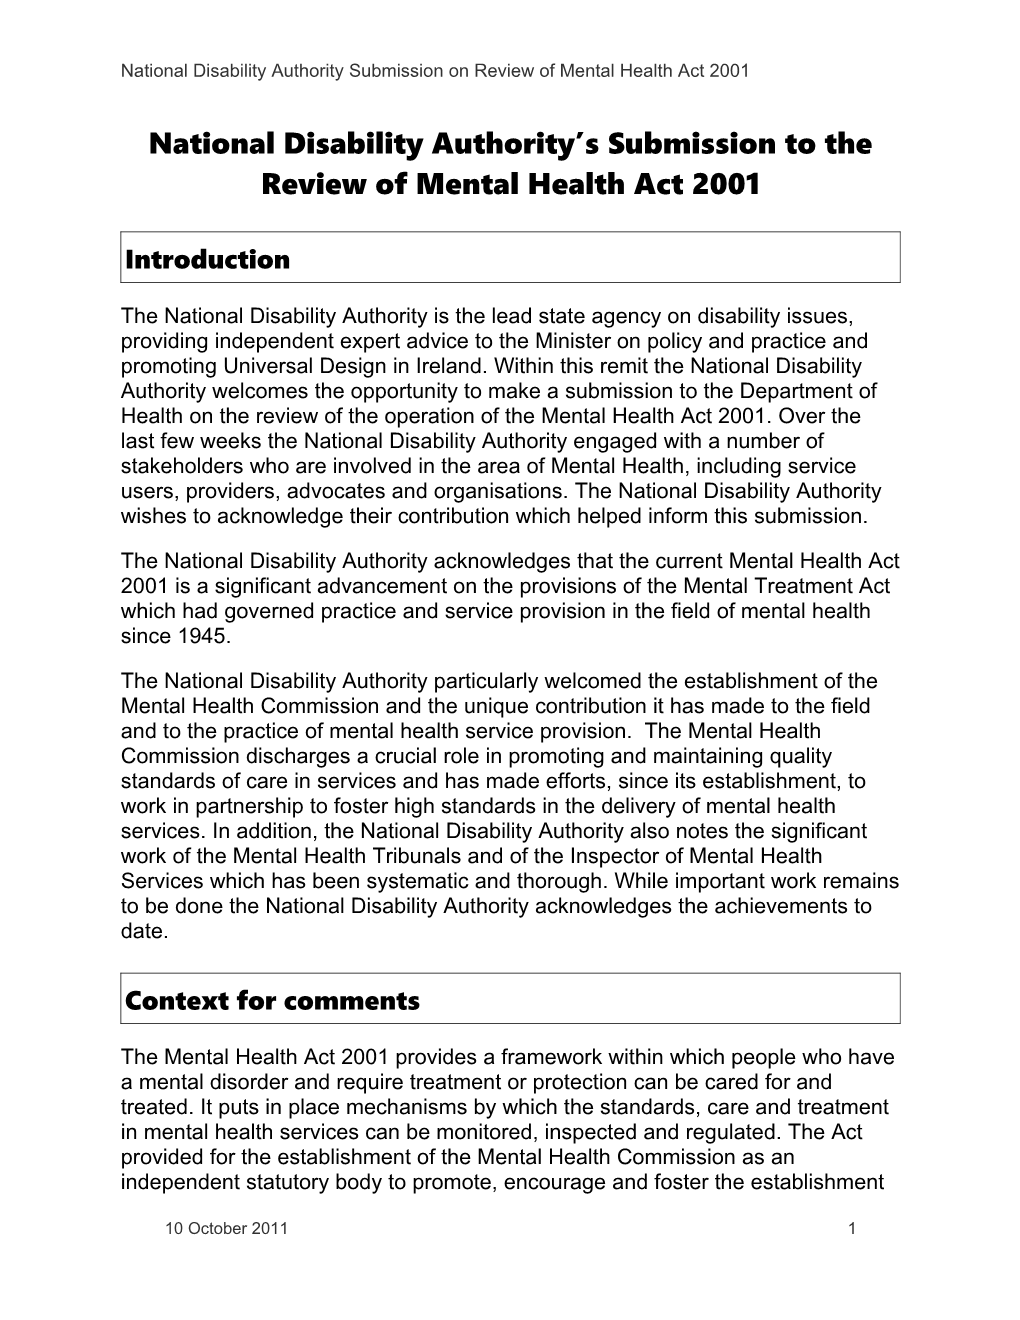 National Disability Authority S Submission to the Review of Mental Health Act 2001